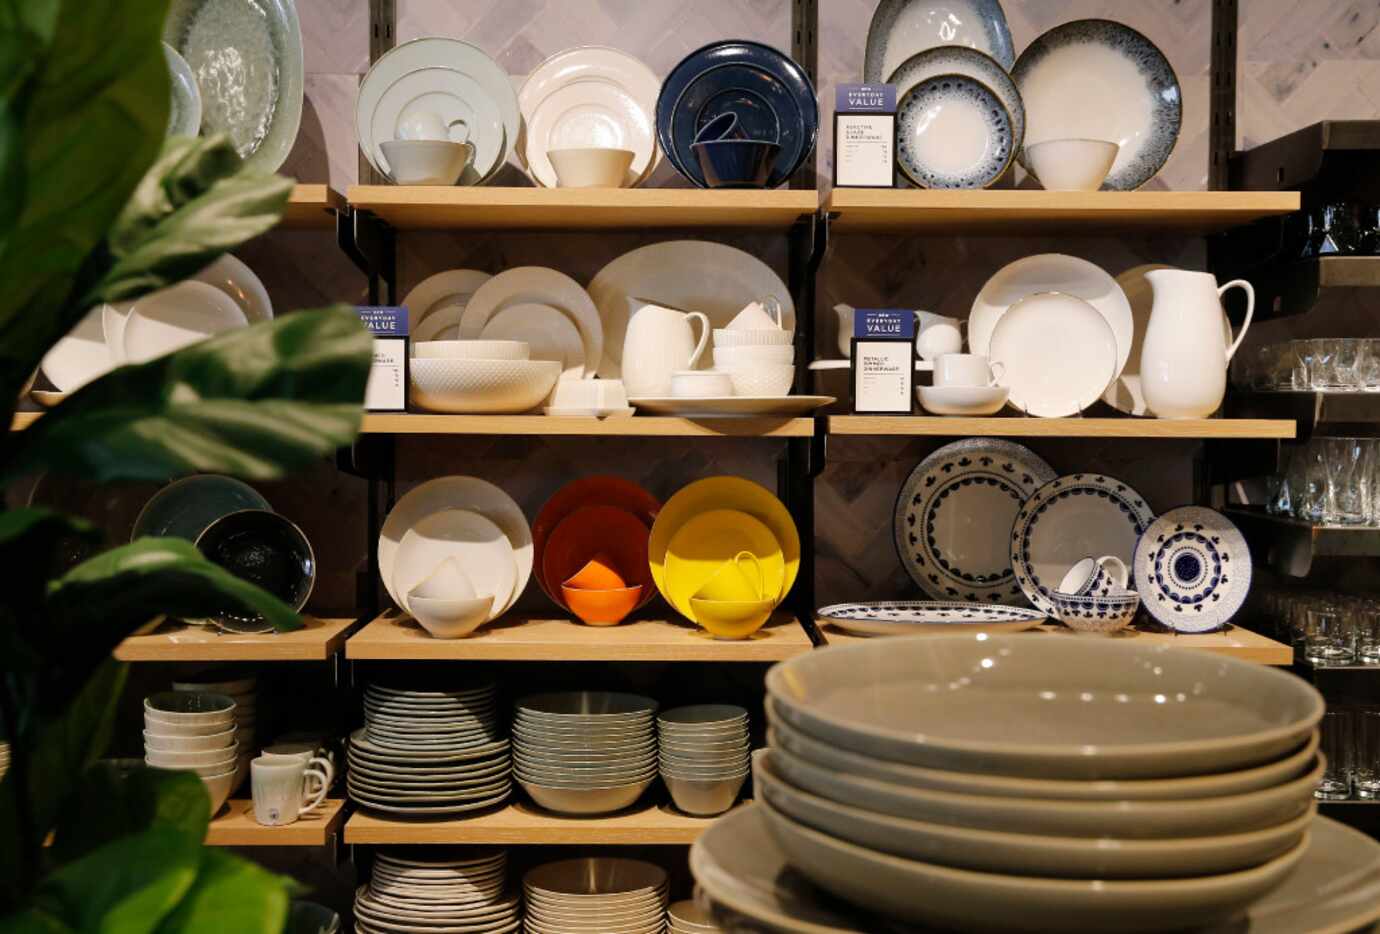 You can mix and match dish ware to create your own personal style.